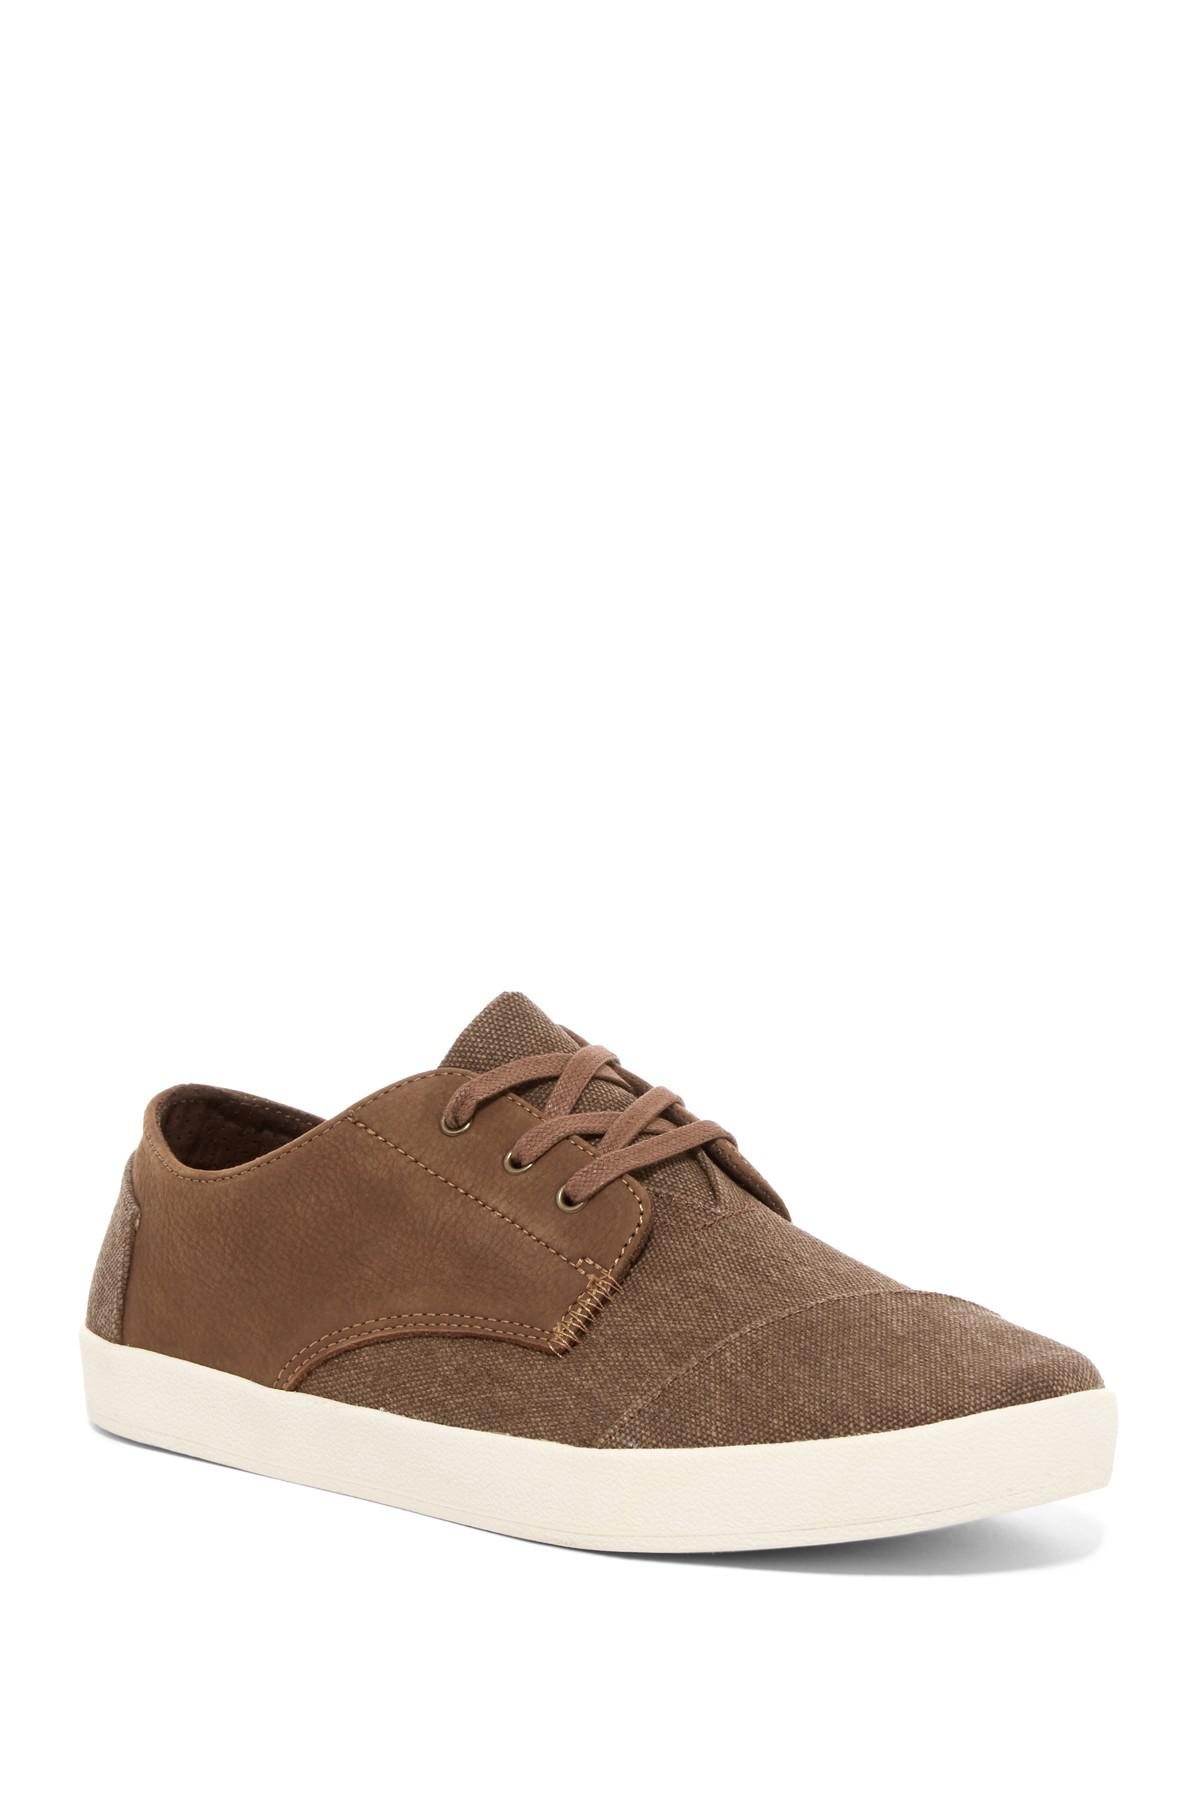 Lyst - Toms Paseo Canvas Sneaker in Brown for Men